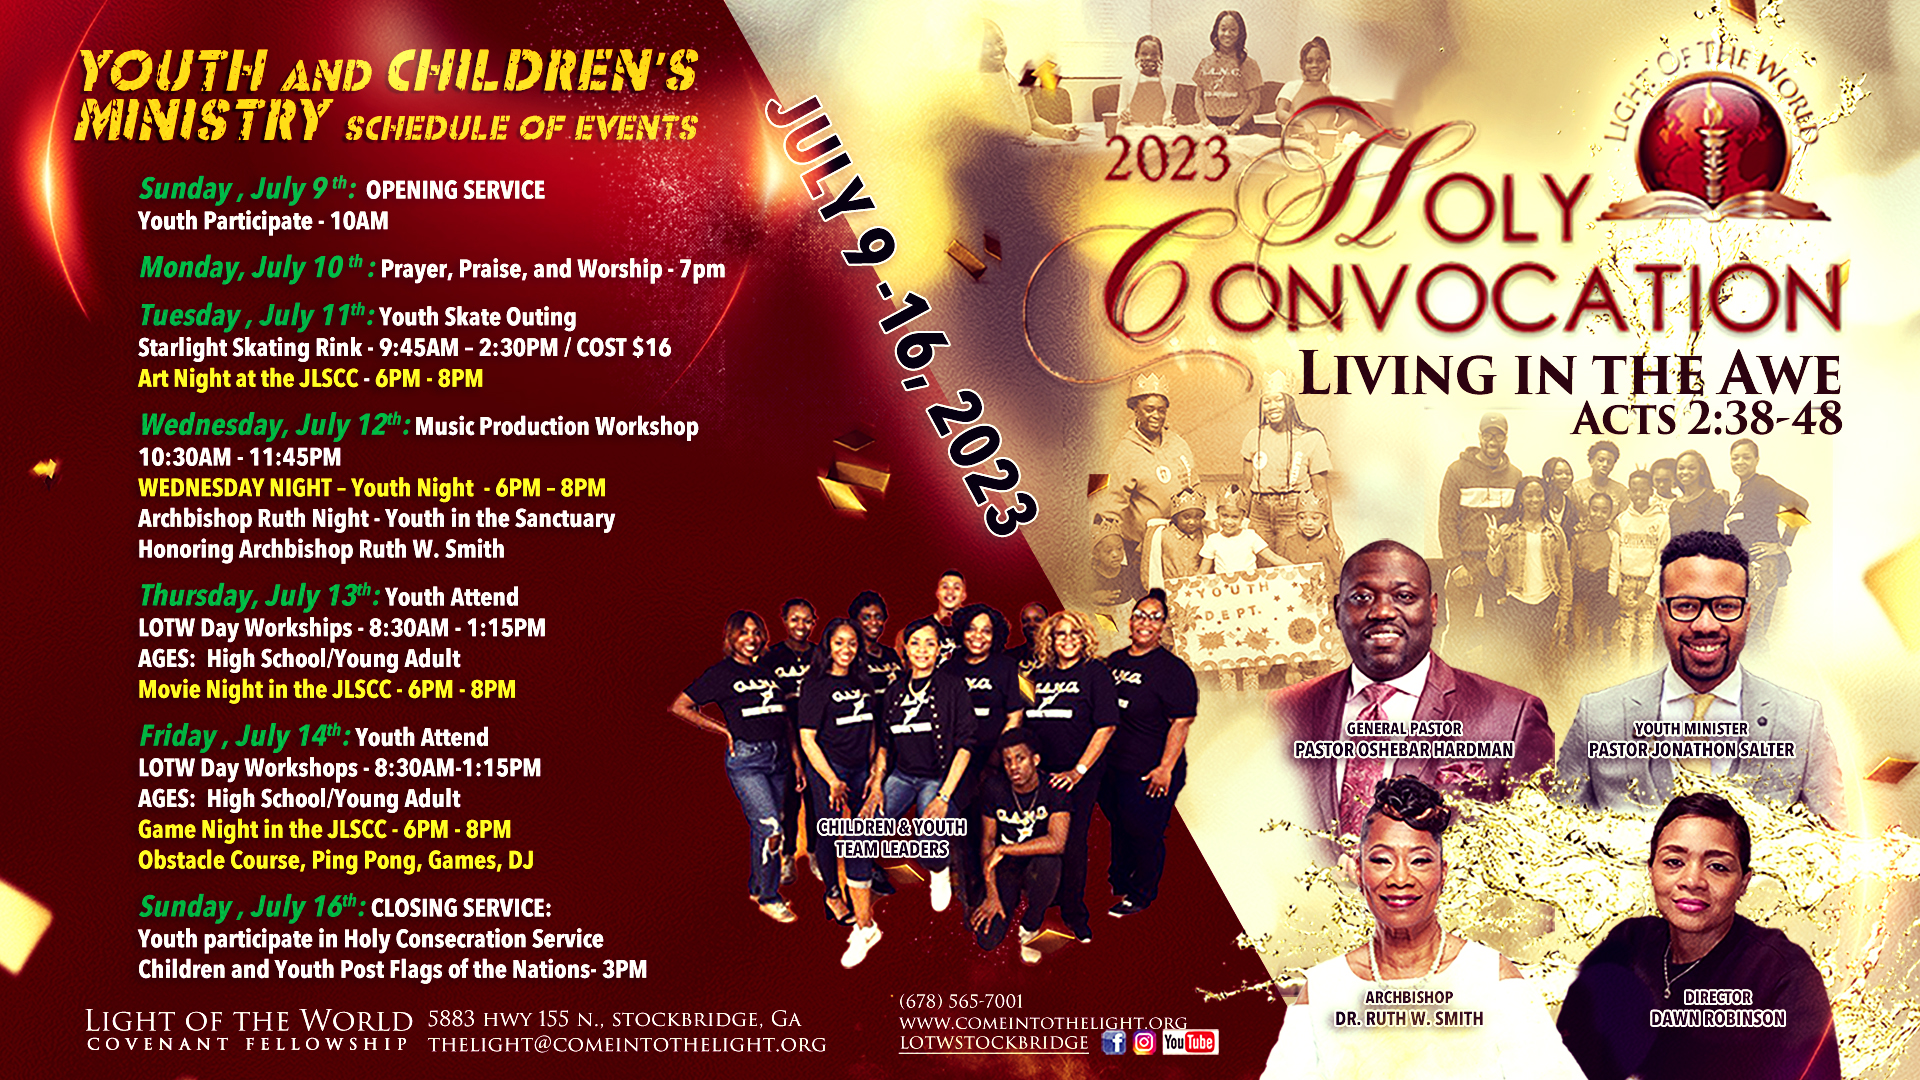 2023 Holy Convocation Youth and Children's Ministry Schedule of Events flyer